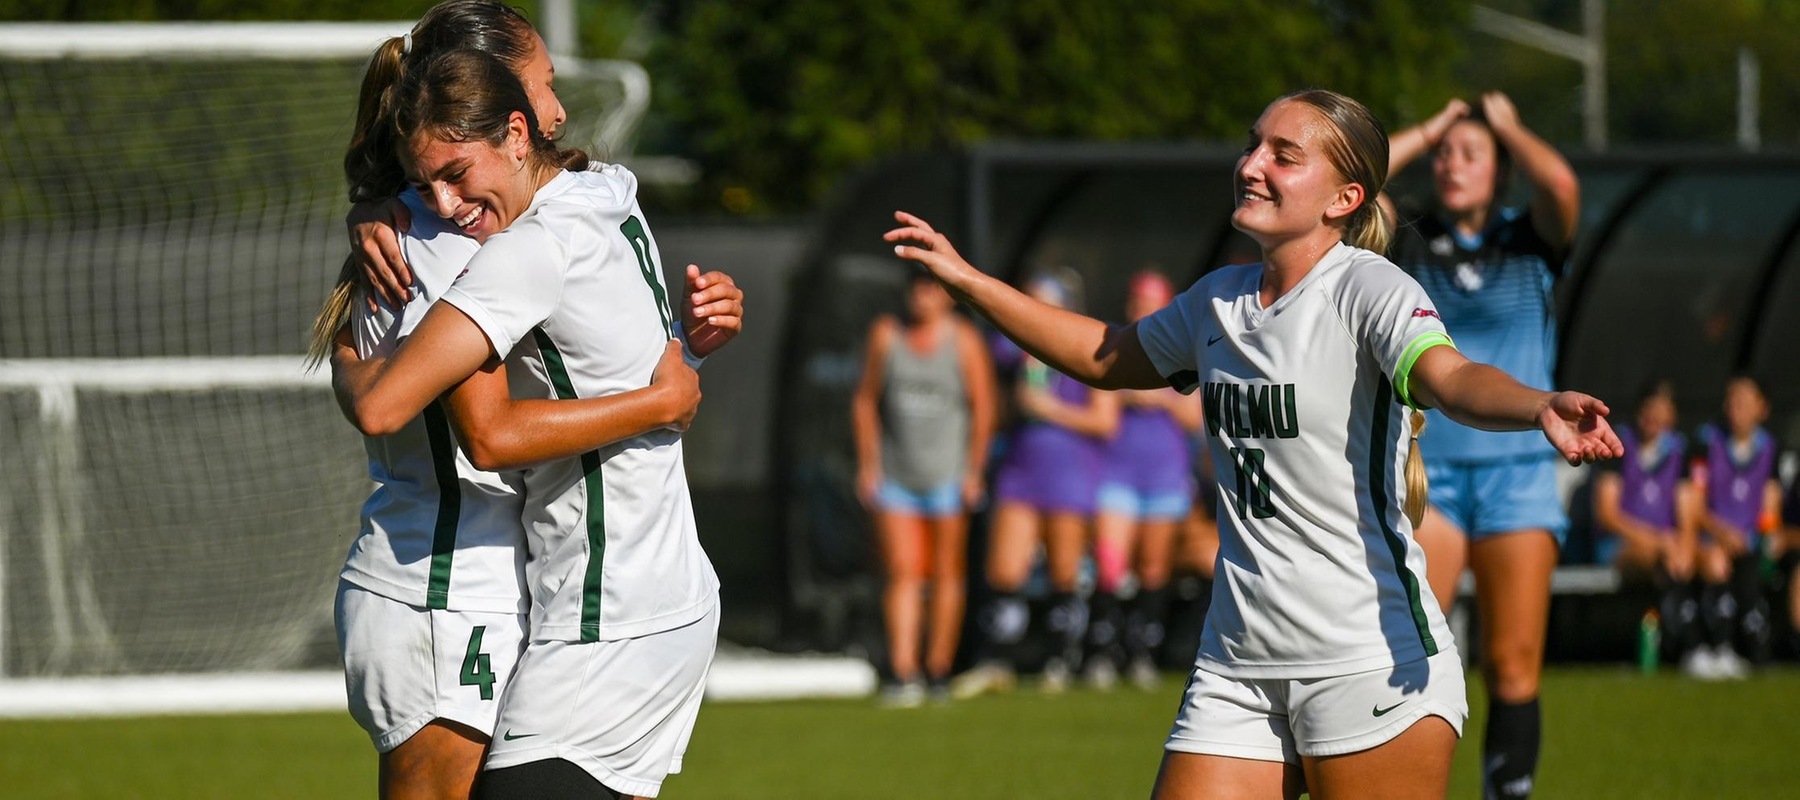 Wilmington University players celebrate after a goal made by Manuela Restrepo (#4) during their NCAA Women’s soccer match at the Wilmington University Sports Complex in Newark, Delaware, October 3, 2023. Photo by Arlene Coseglia